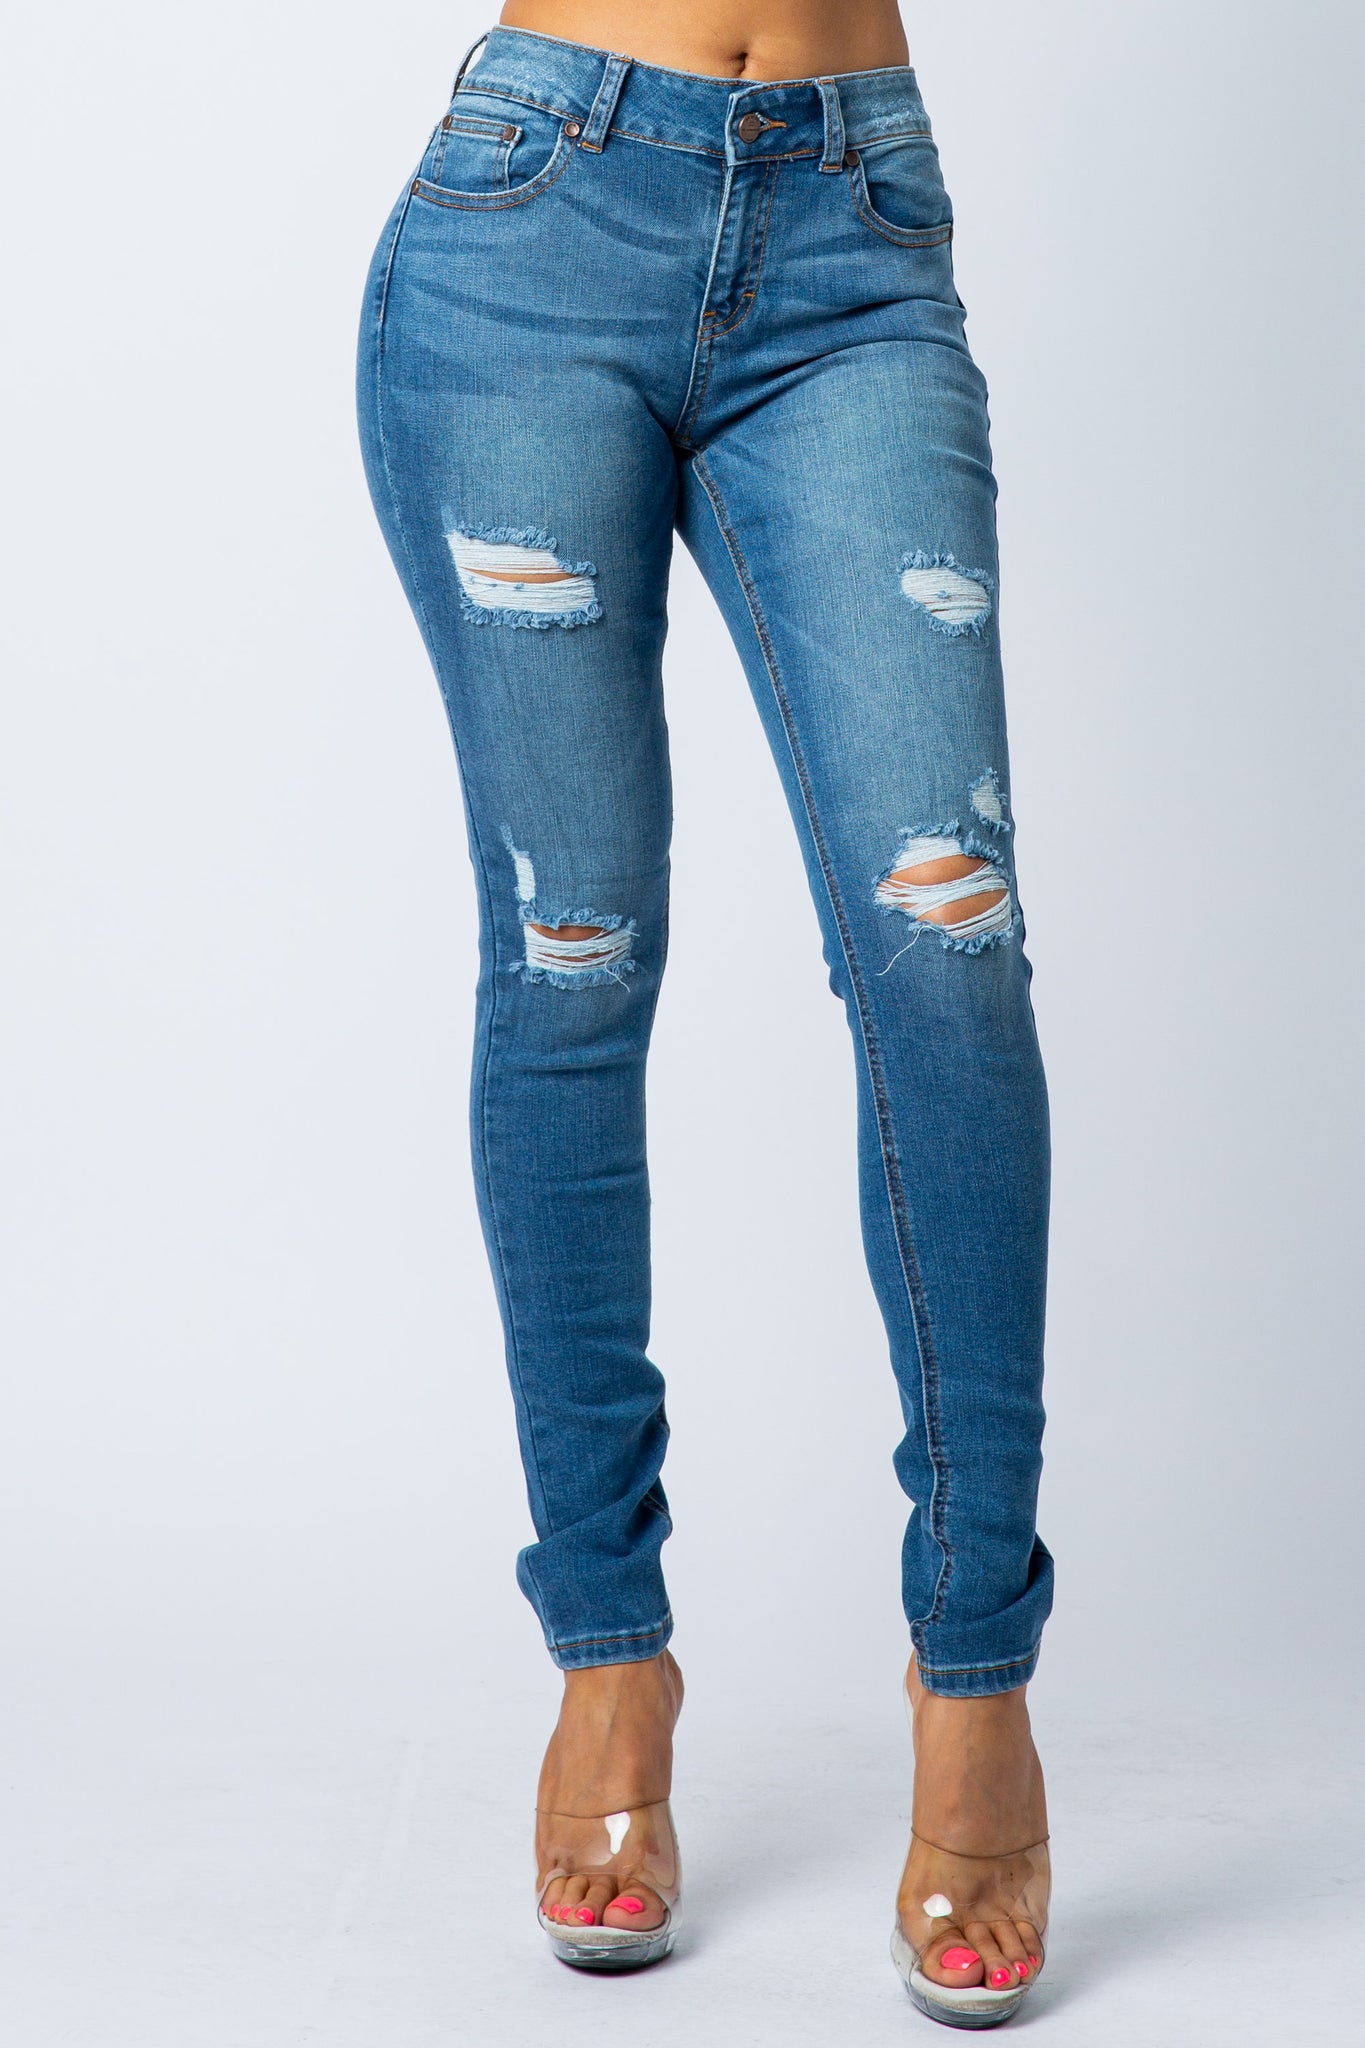 1052 Women's Mid Waisted Distressed Skinny Jeans